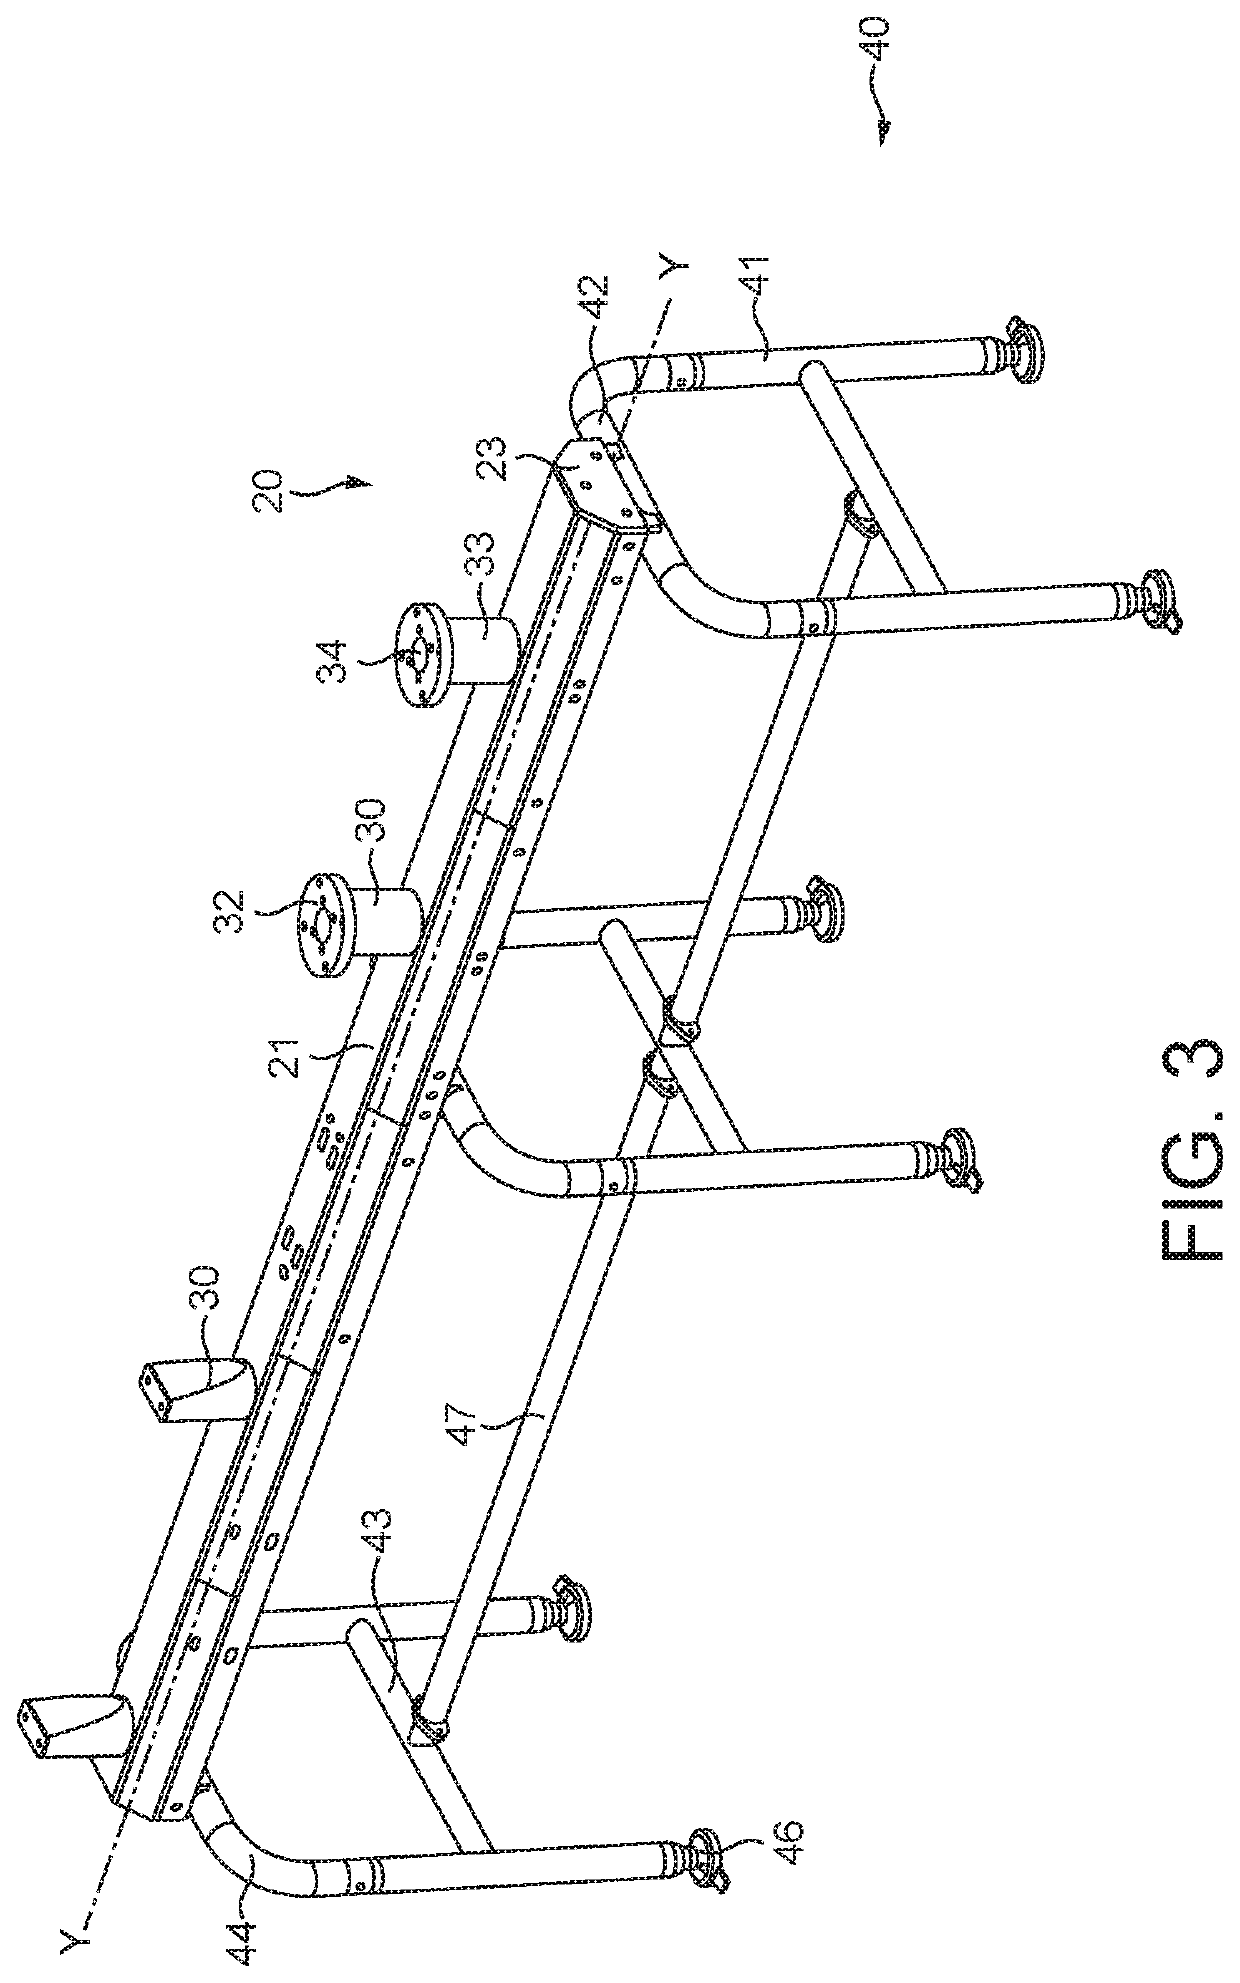 Support structure for a conveyor system